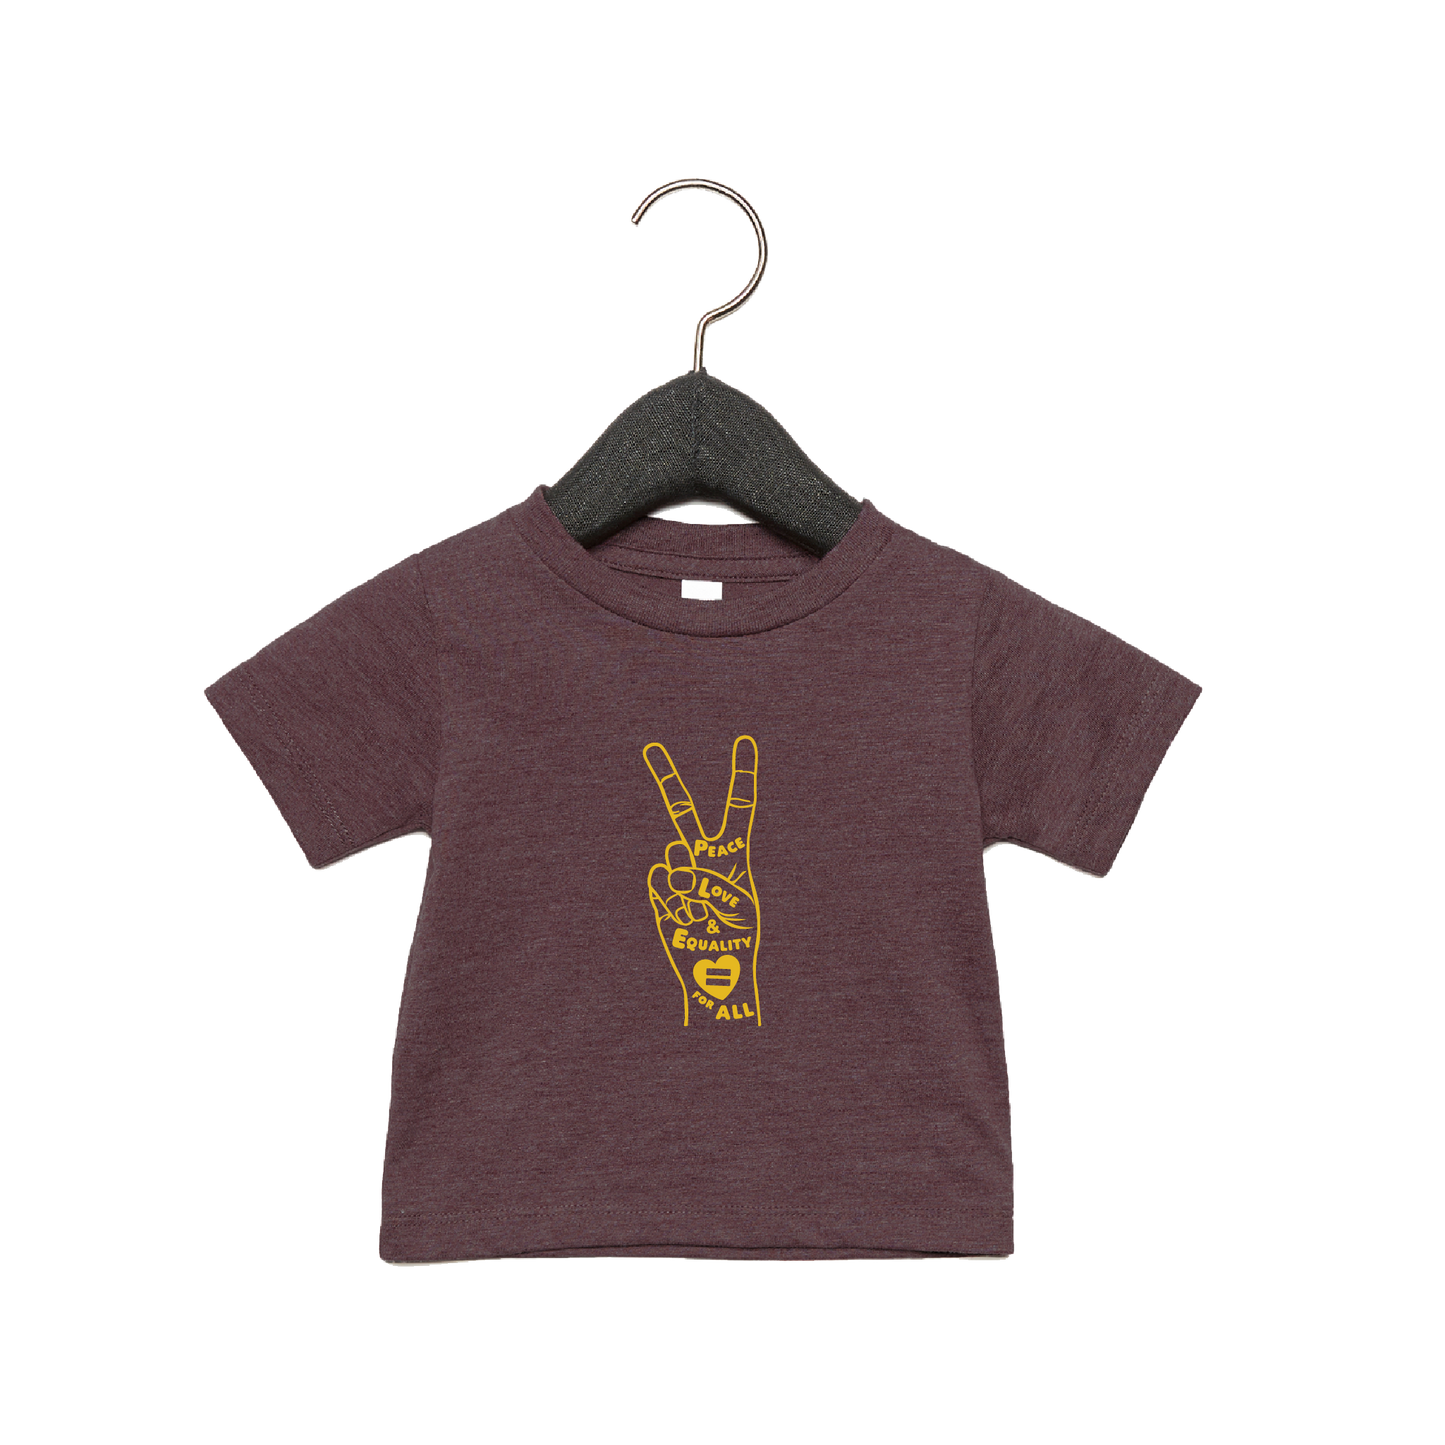 Peace, Love and Equality Baby T-shirt